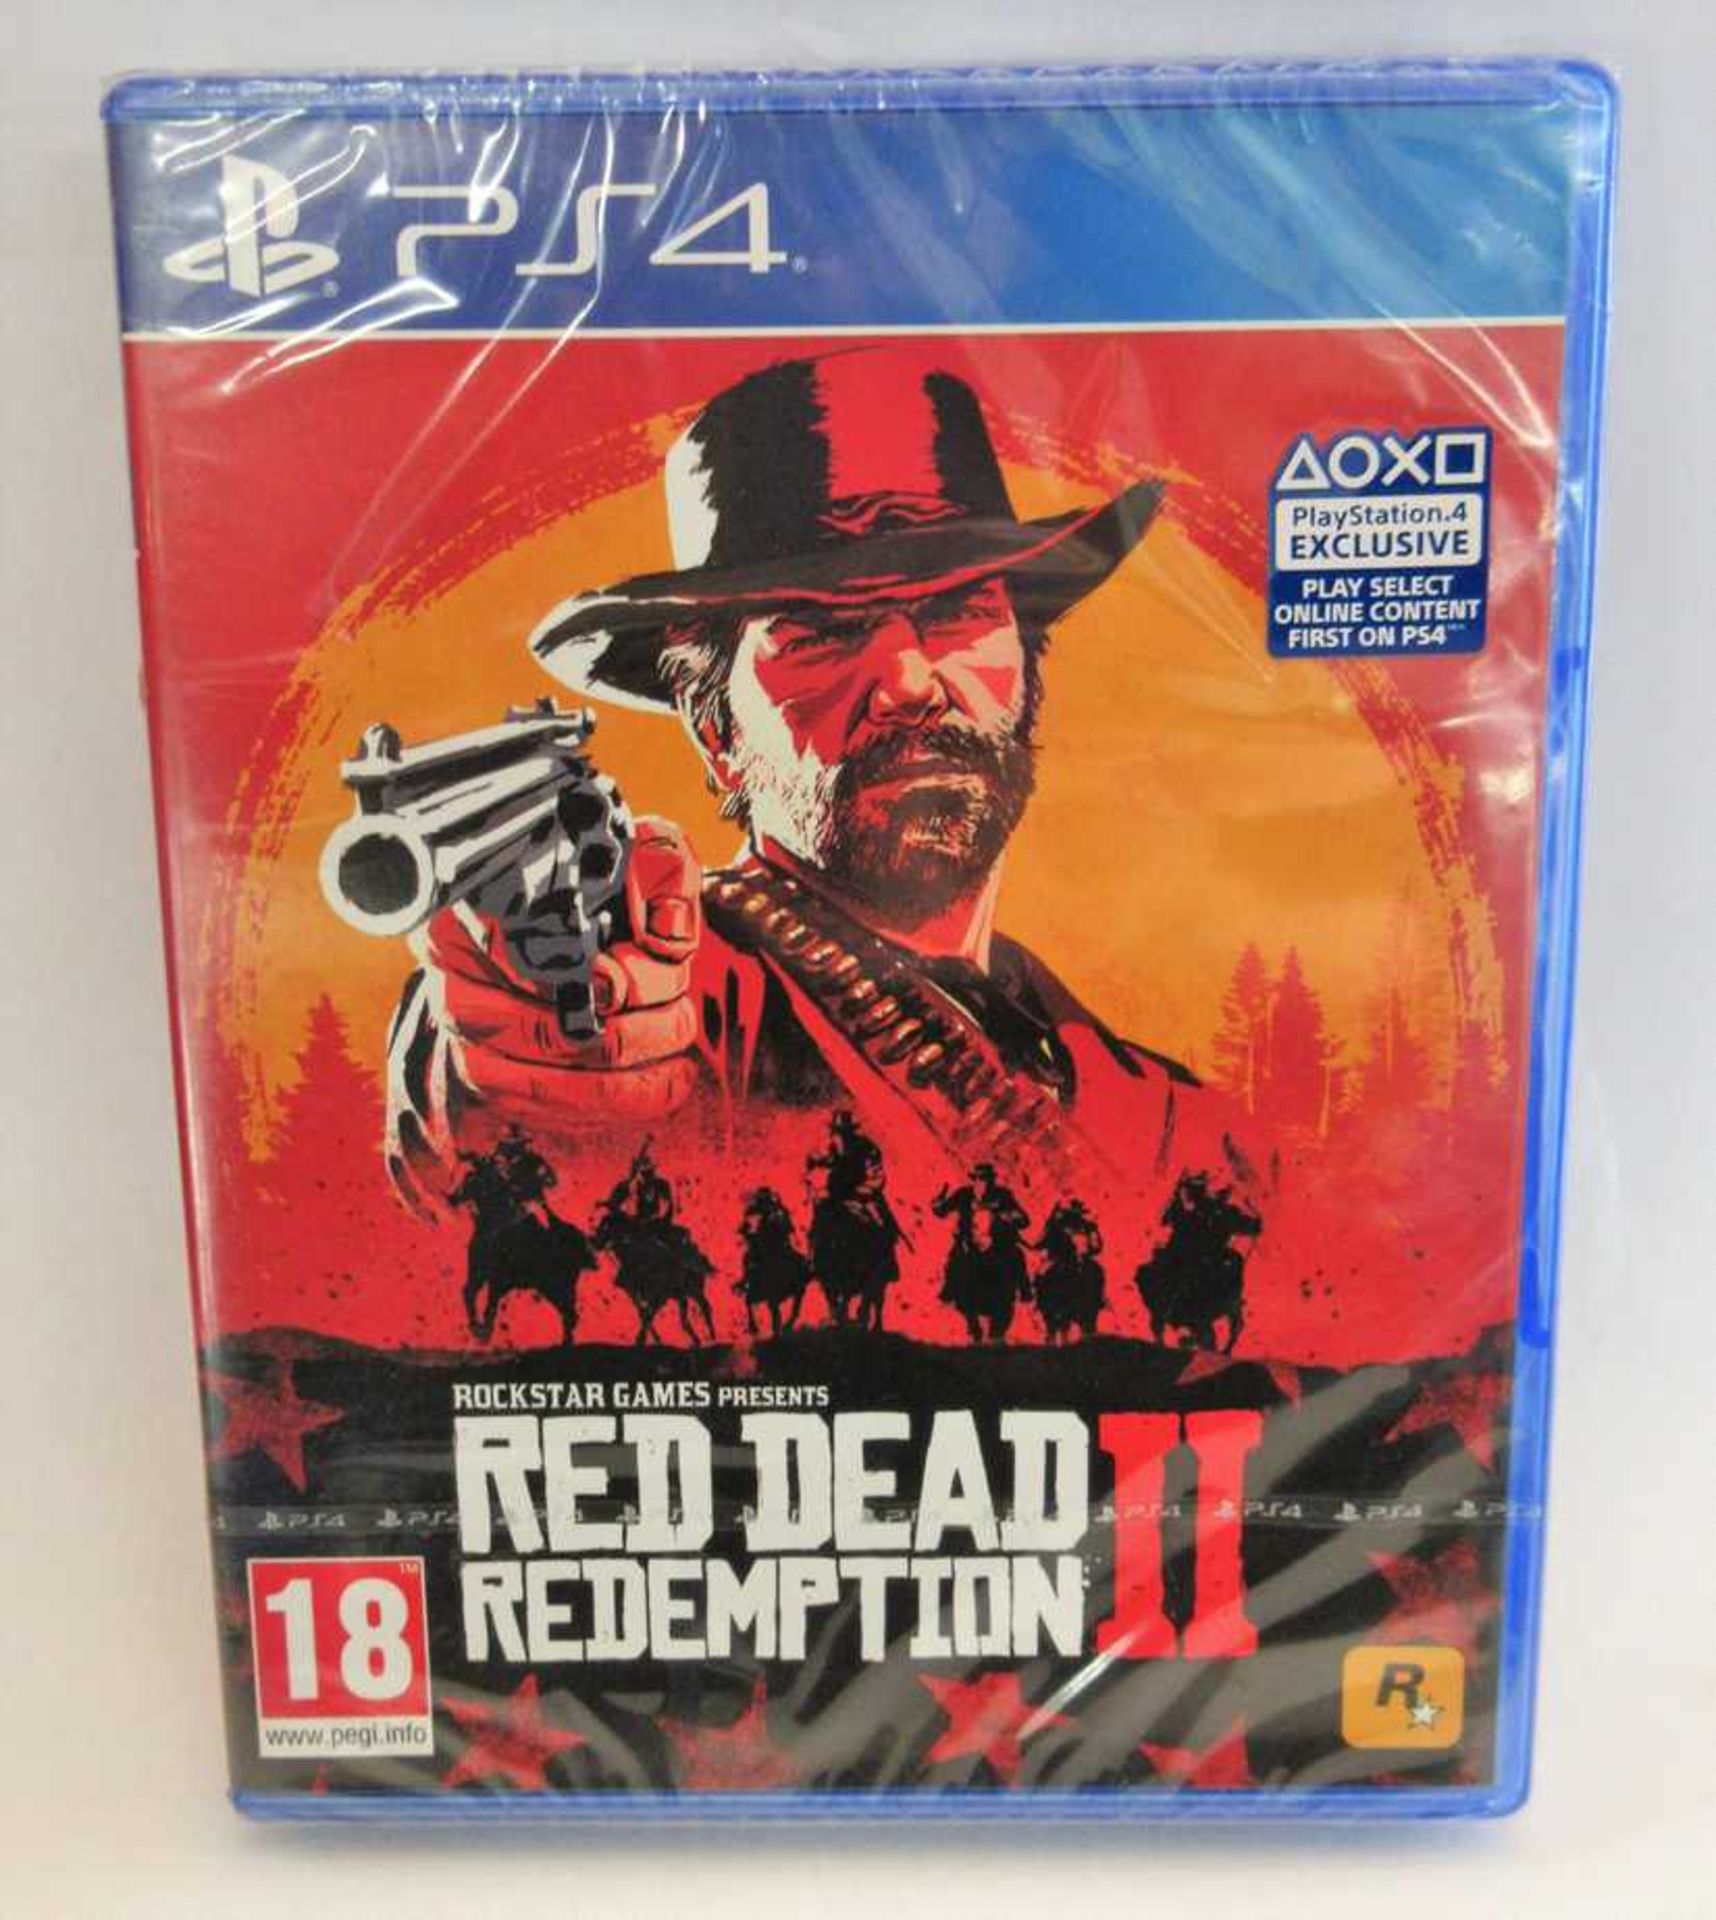 Fifteen boxed as new Red Dead Redemption 2 game disks for PS4 (Cases sealed).